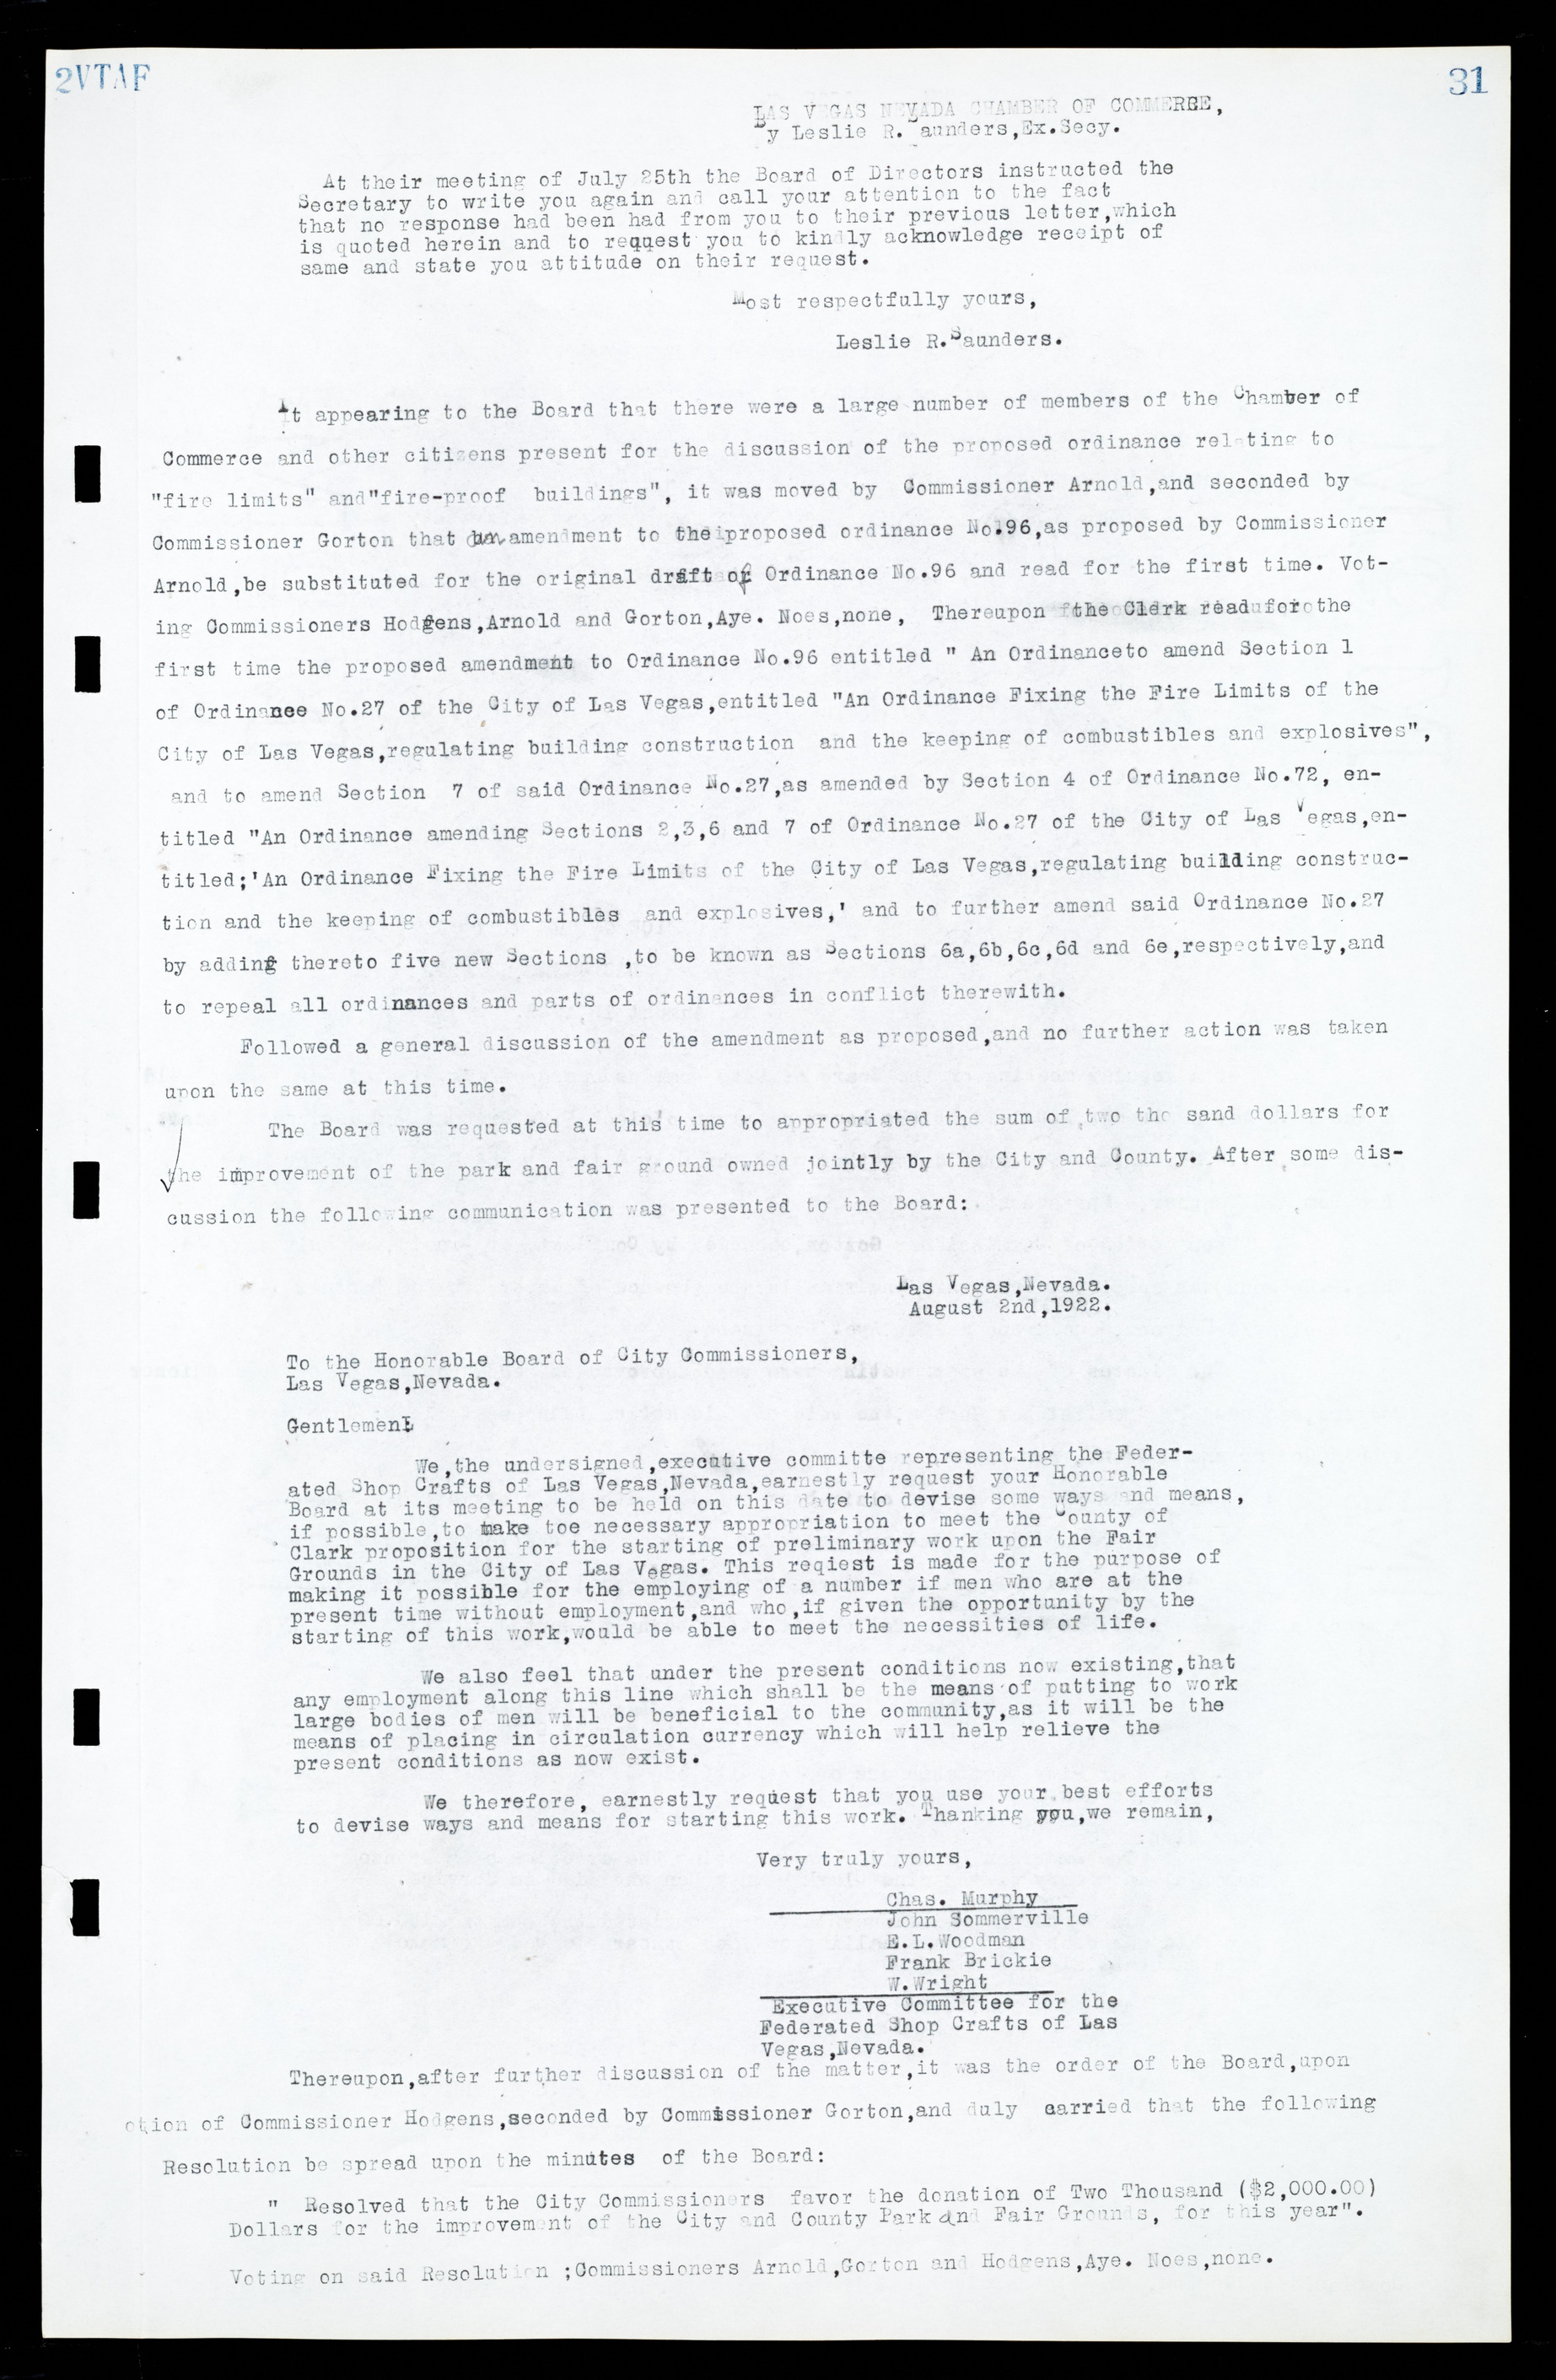 Las Vegas City Commission Minutes, March 1, 1922 to May 10, 1929, lvc000002-38